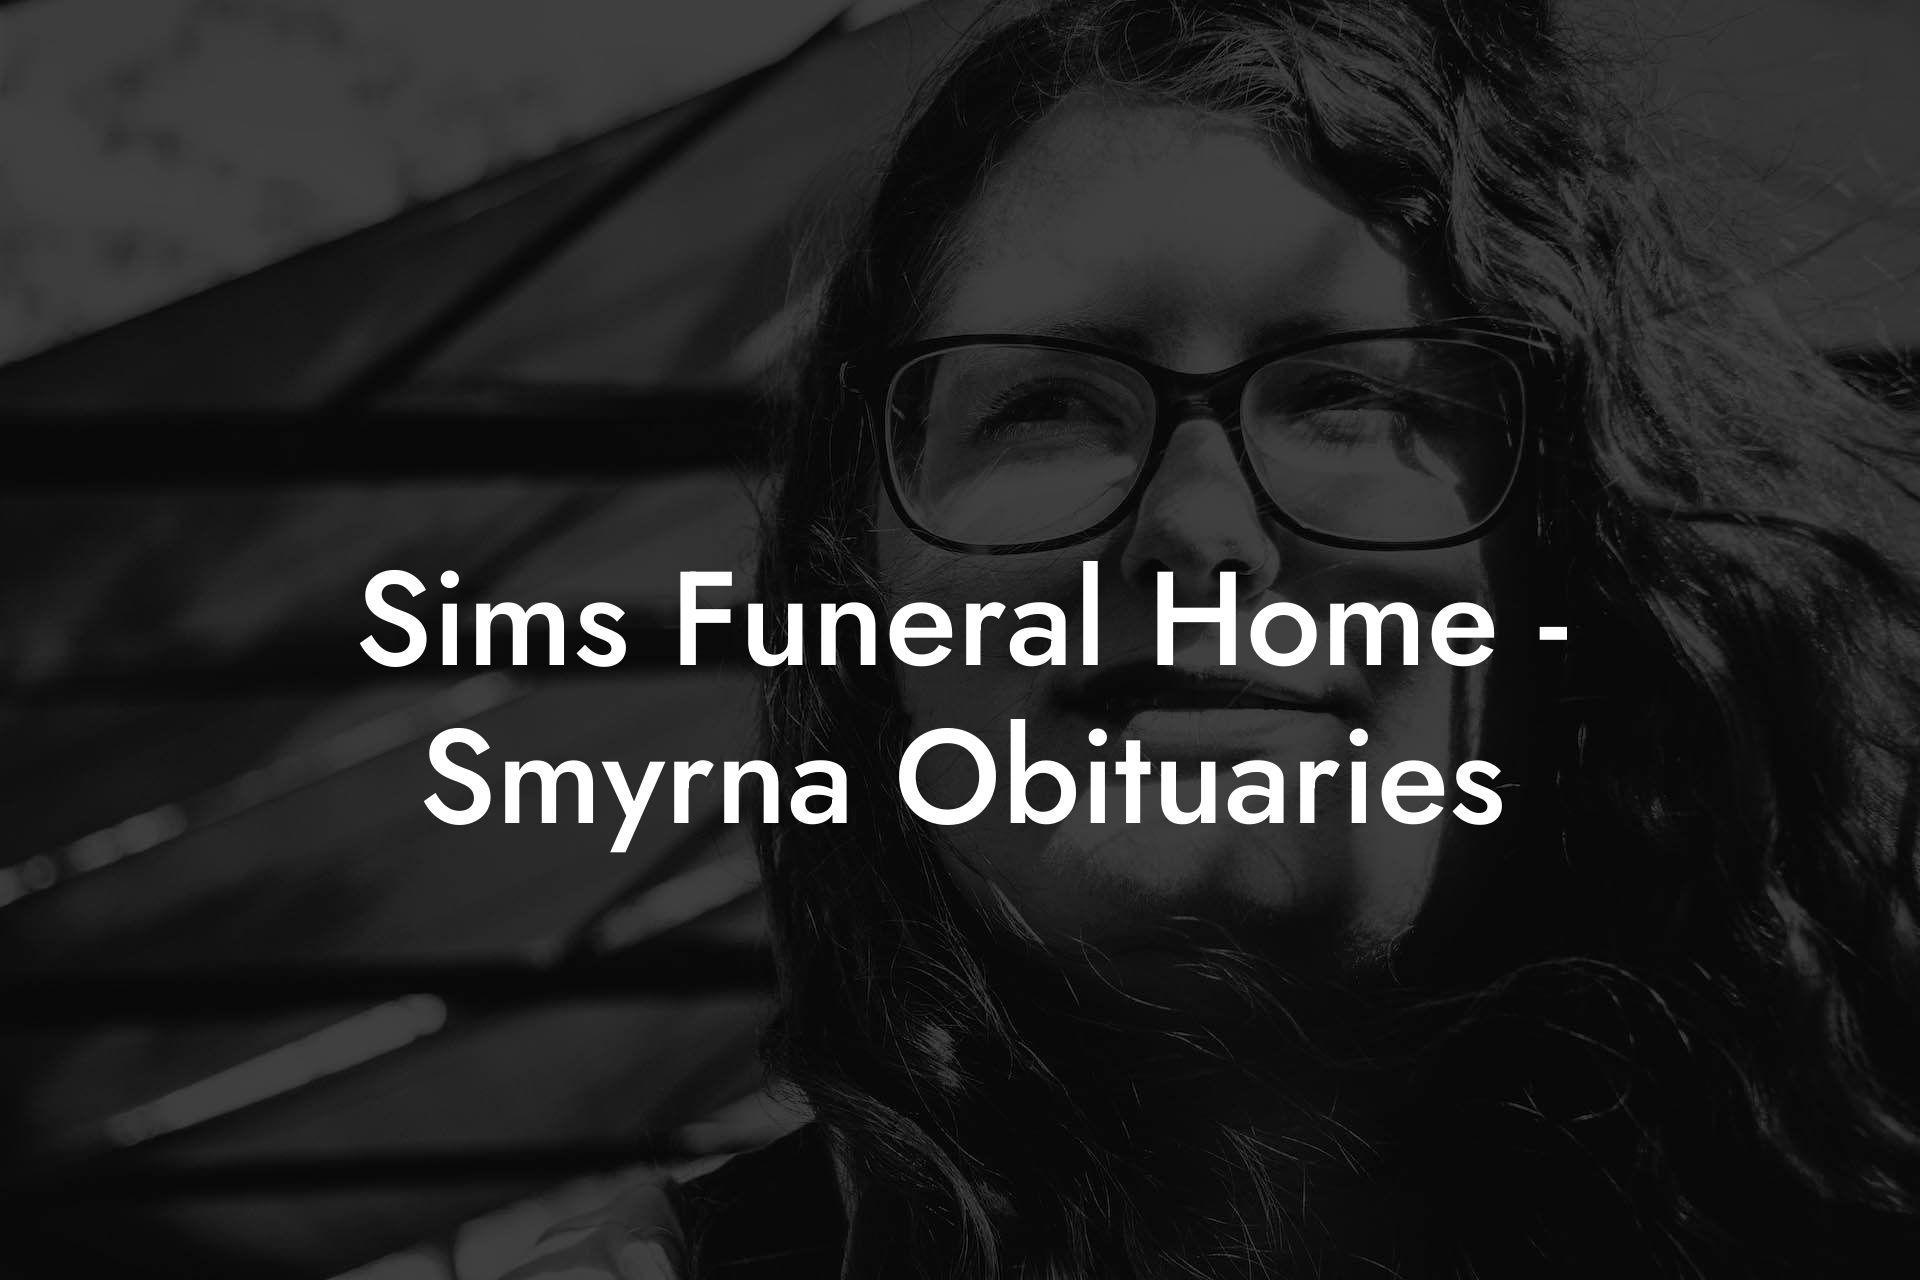 Sims Funeral Home - Smyrna Obituaries